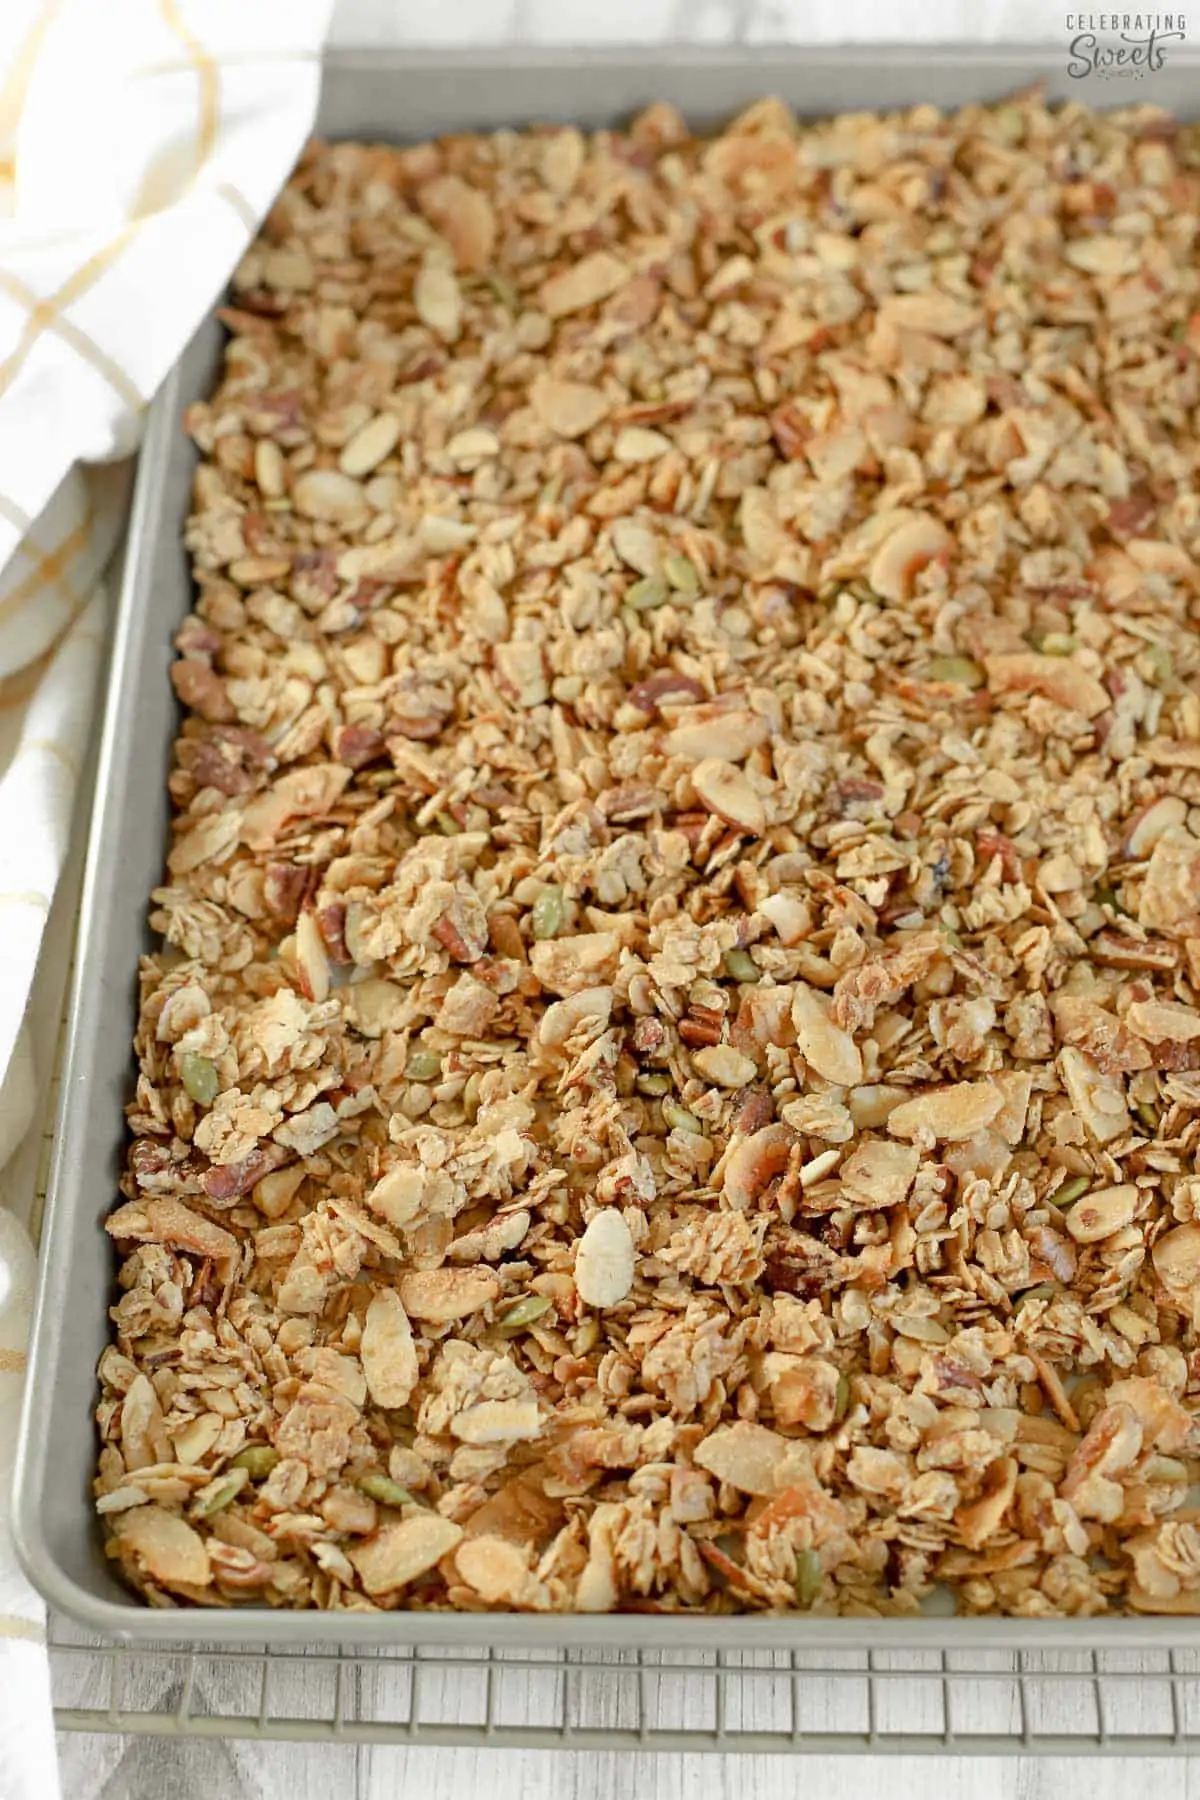 Baking sheet of granola on a wire rack.